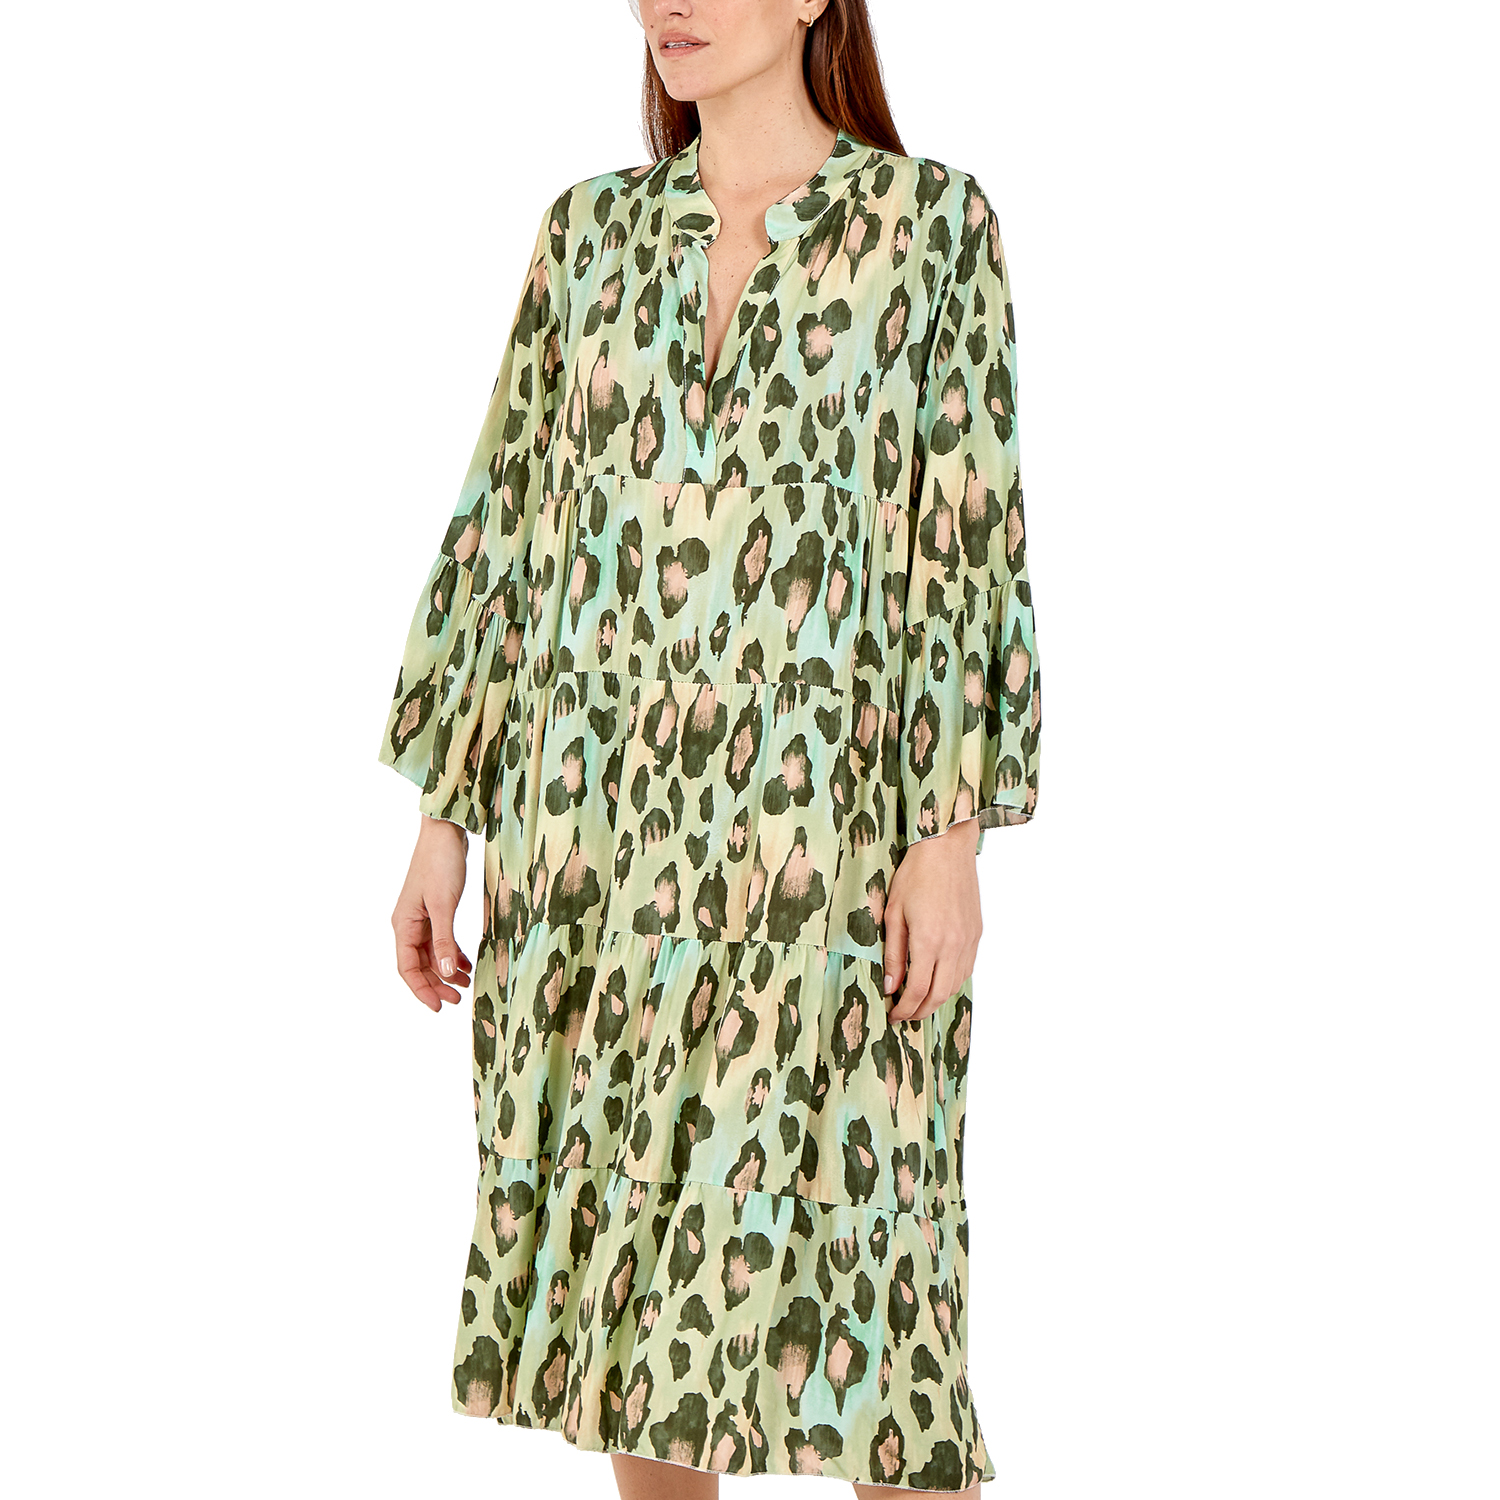 Nova of London Midi Leopard Print Tiered Dress in Sage Colour (Size up to 20) (60x113cm)